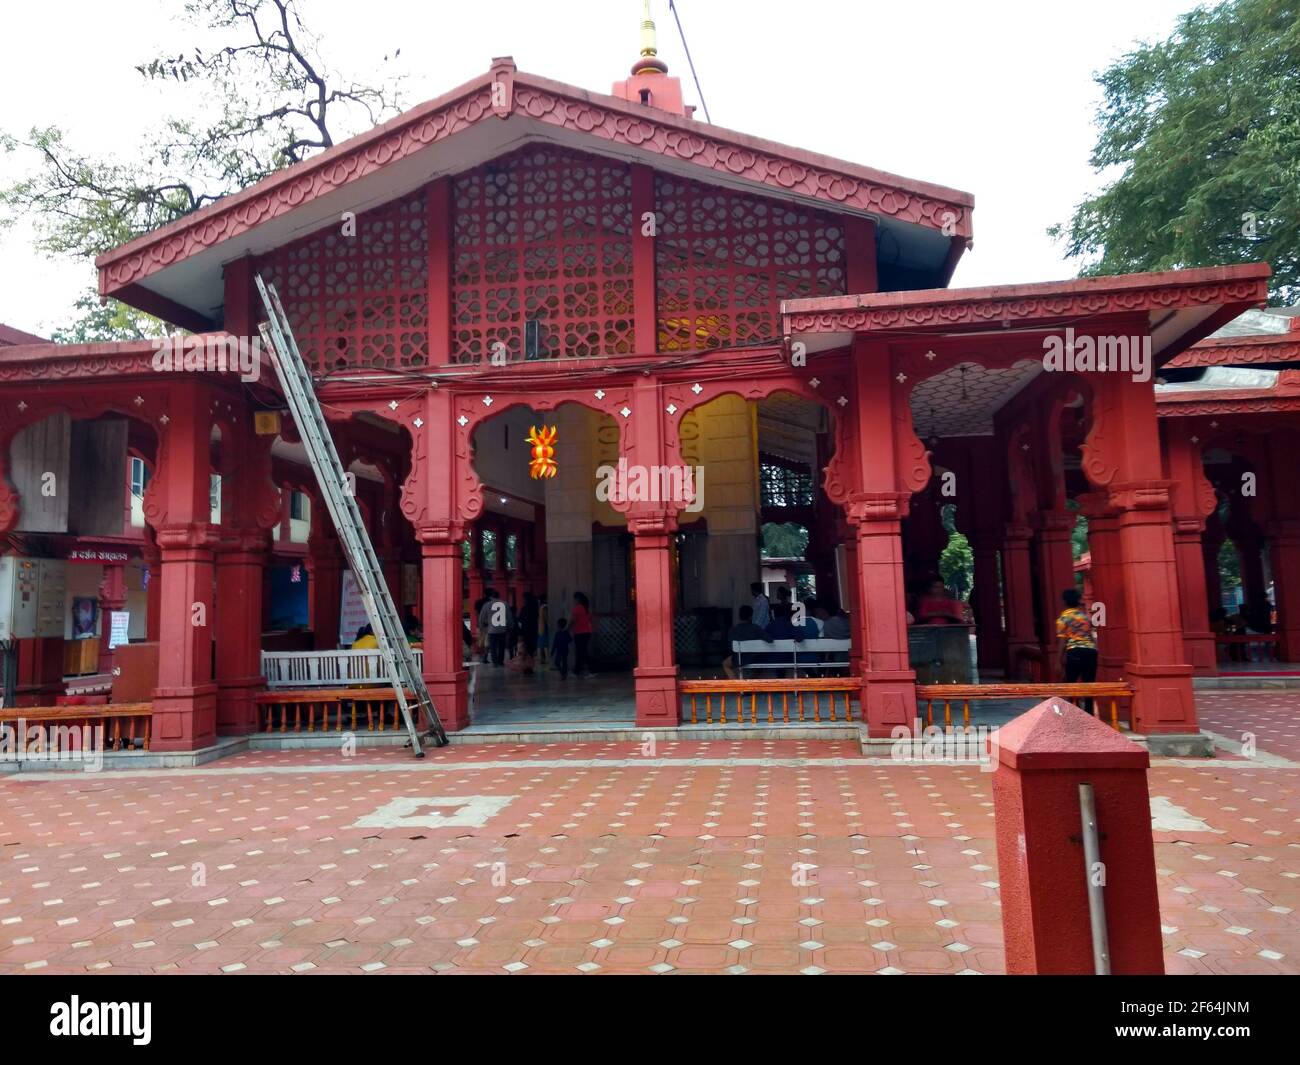 Pune, India - 11-21-2018: side view of sarasbag temple, Pune built in the 18th century Stock Photo